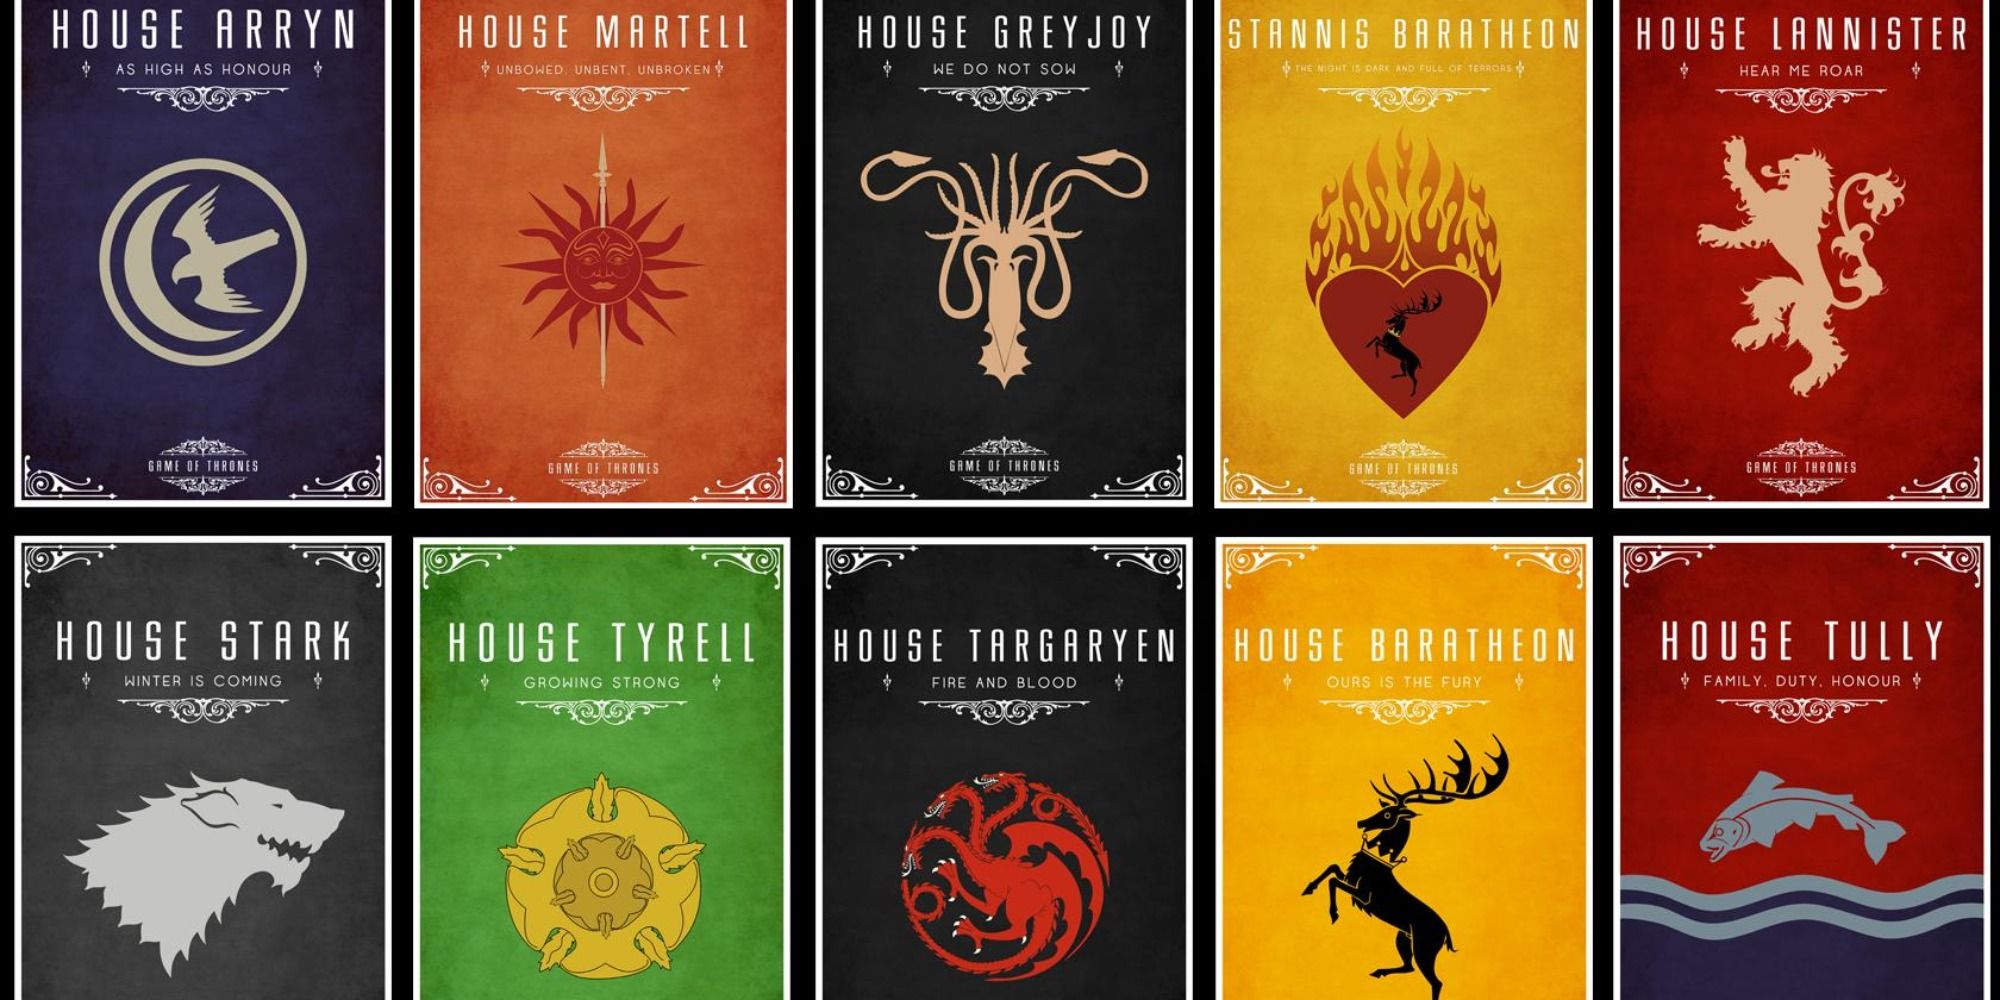 game of thrones character list by house